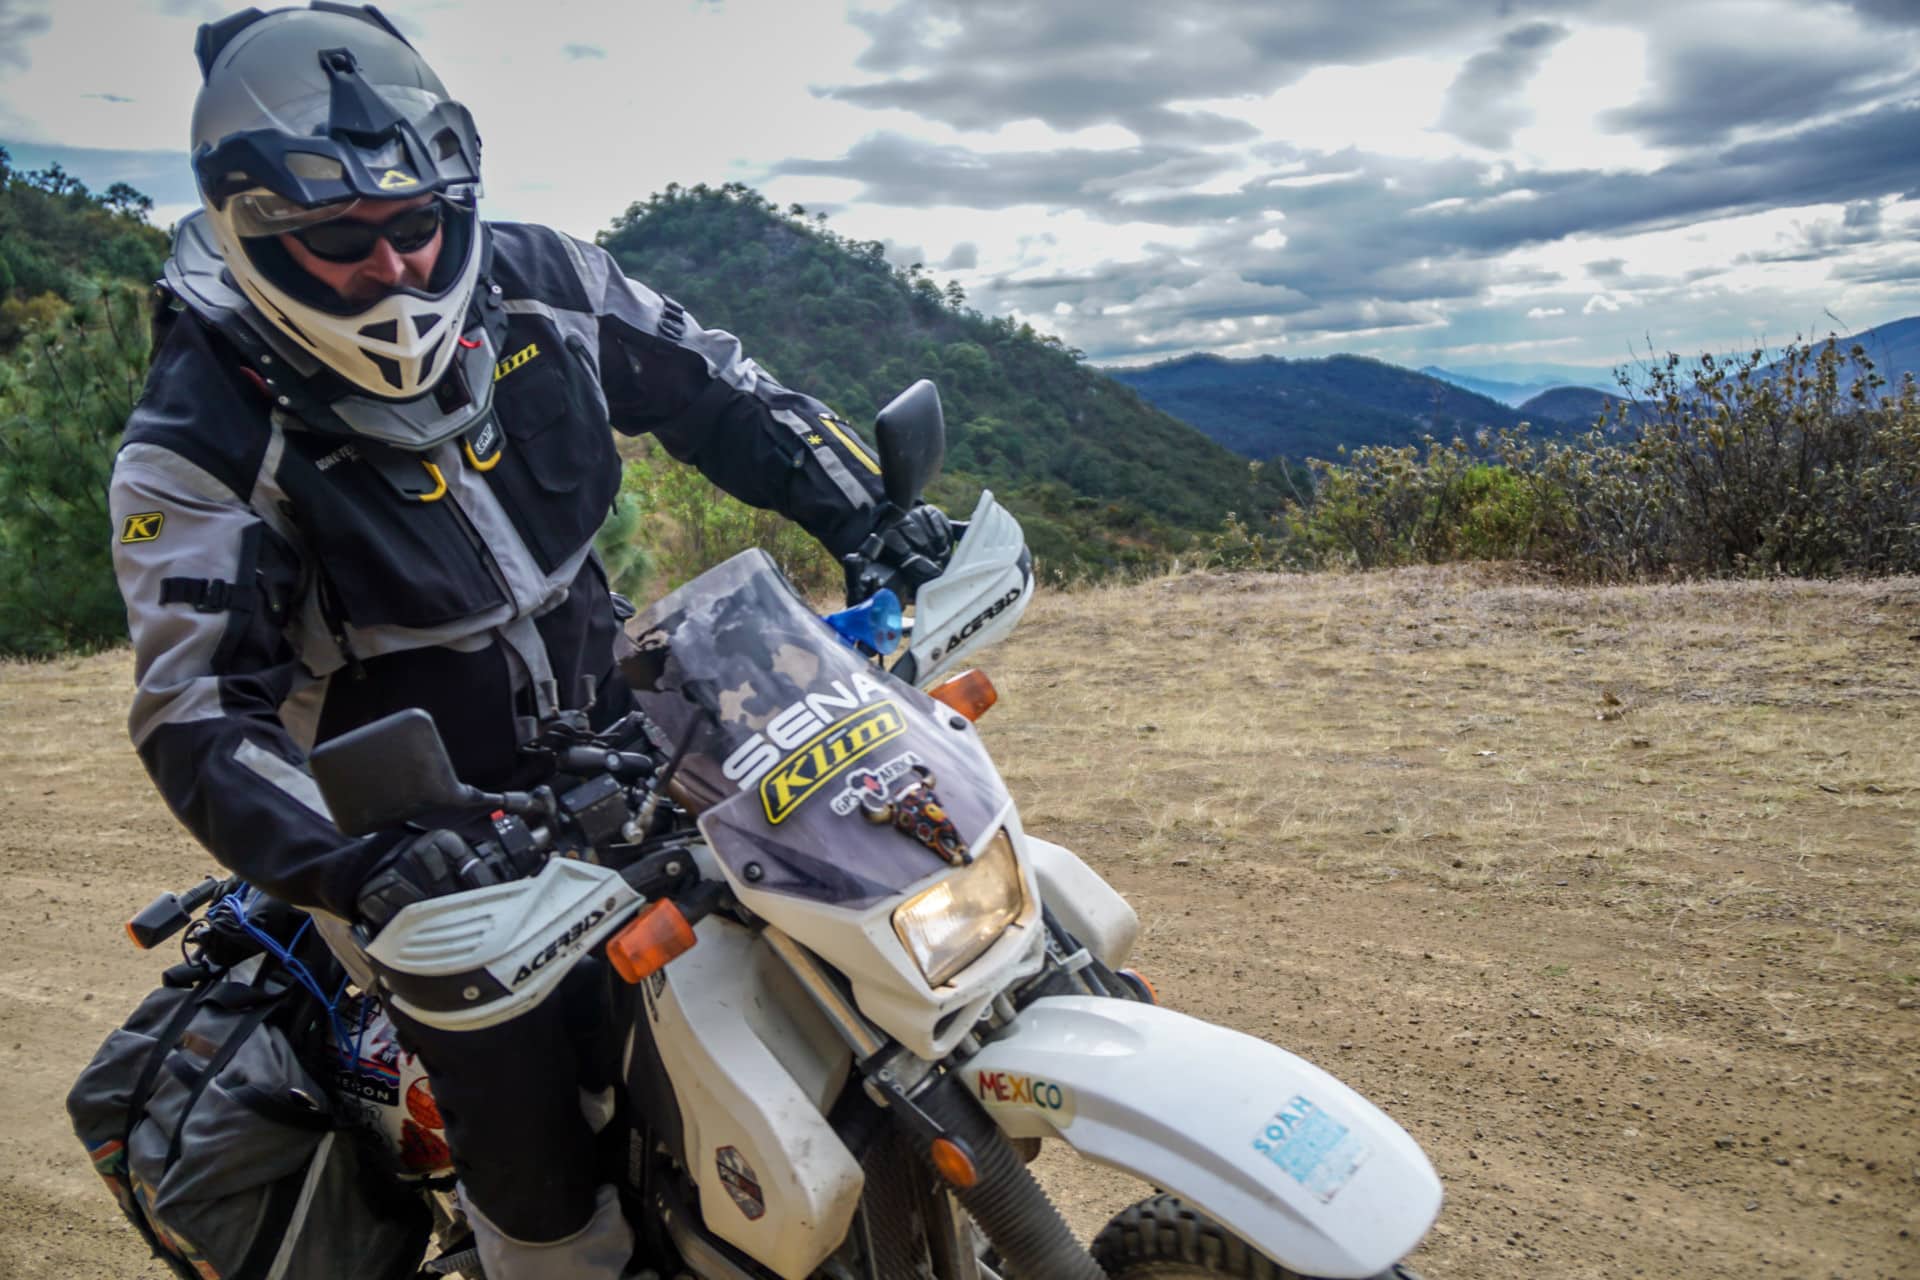 What’s the best motorcycle for a long-distance travel?